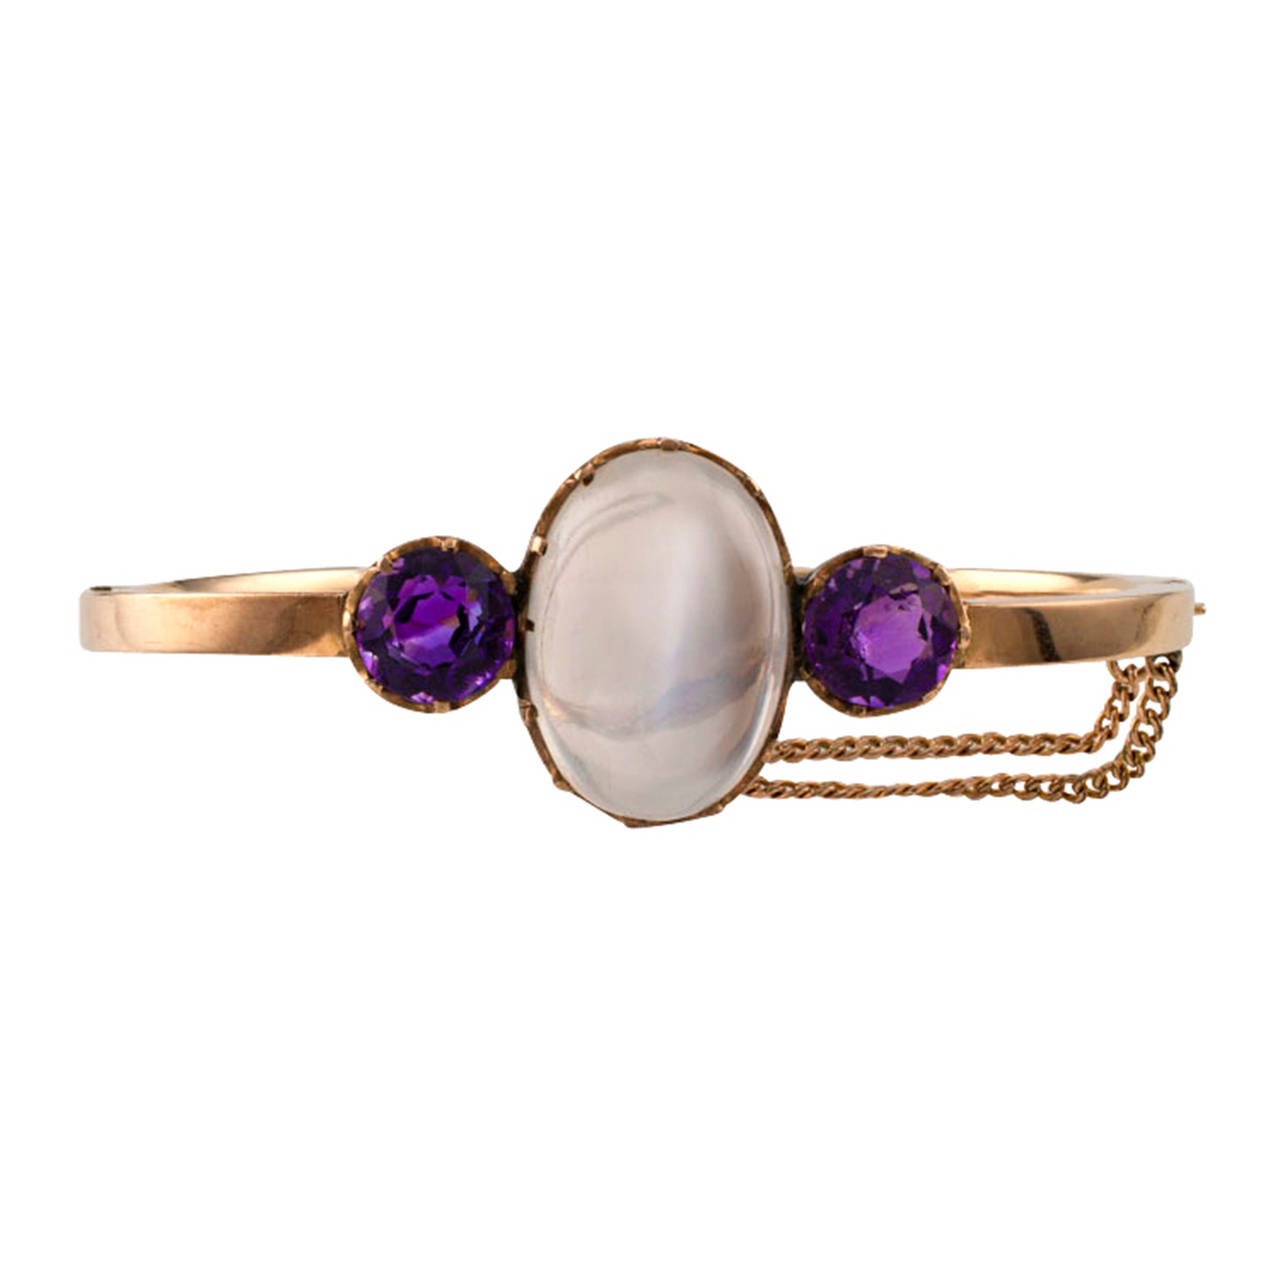 This unique Victorian moonstone and amethyst bangle was made around 1900.  The hinged design centers upon a mystifying color scheme dominated by a beautiful glowing, oblong moonstone, artfully set between a pair of bright faceted round amethysts,